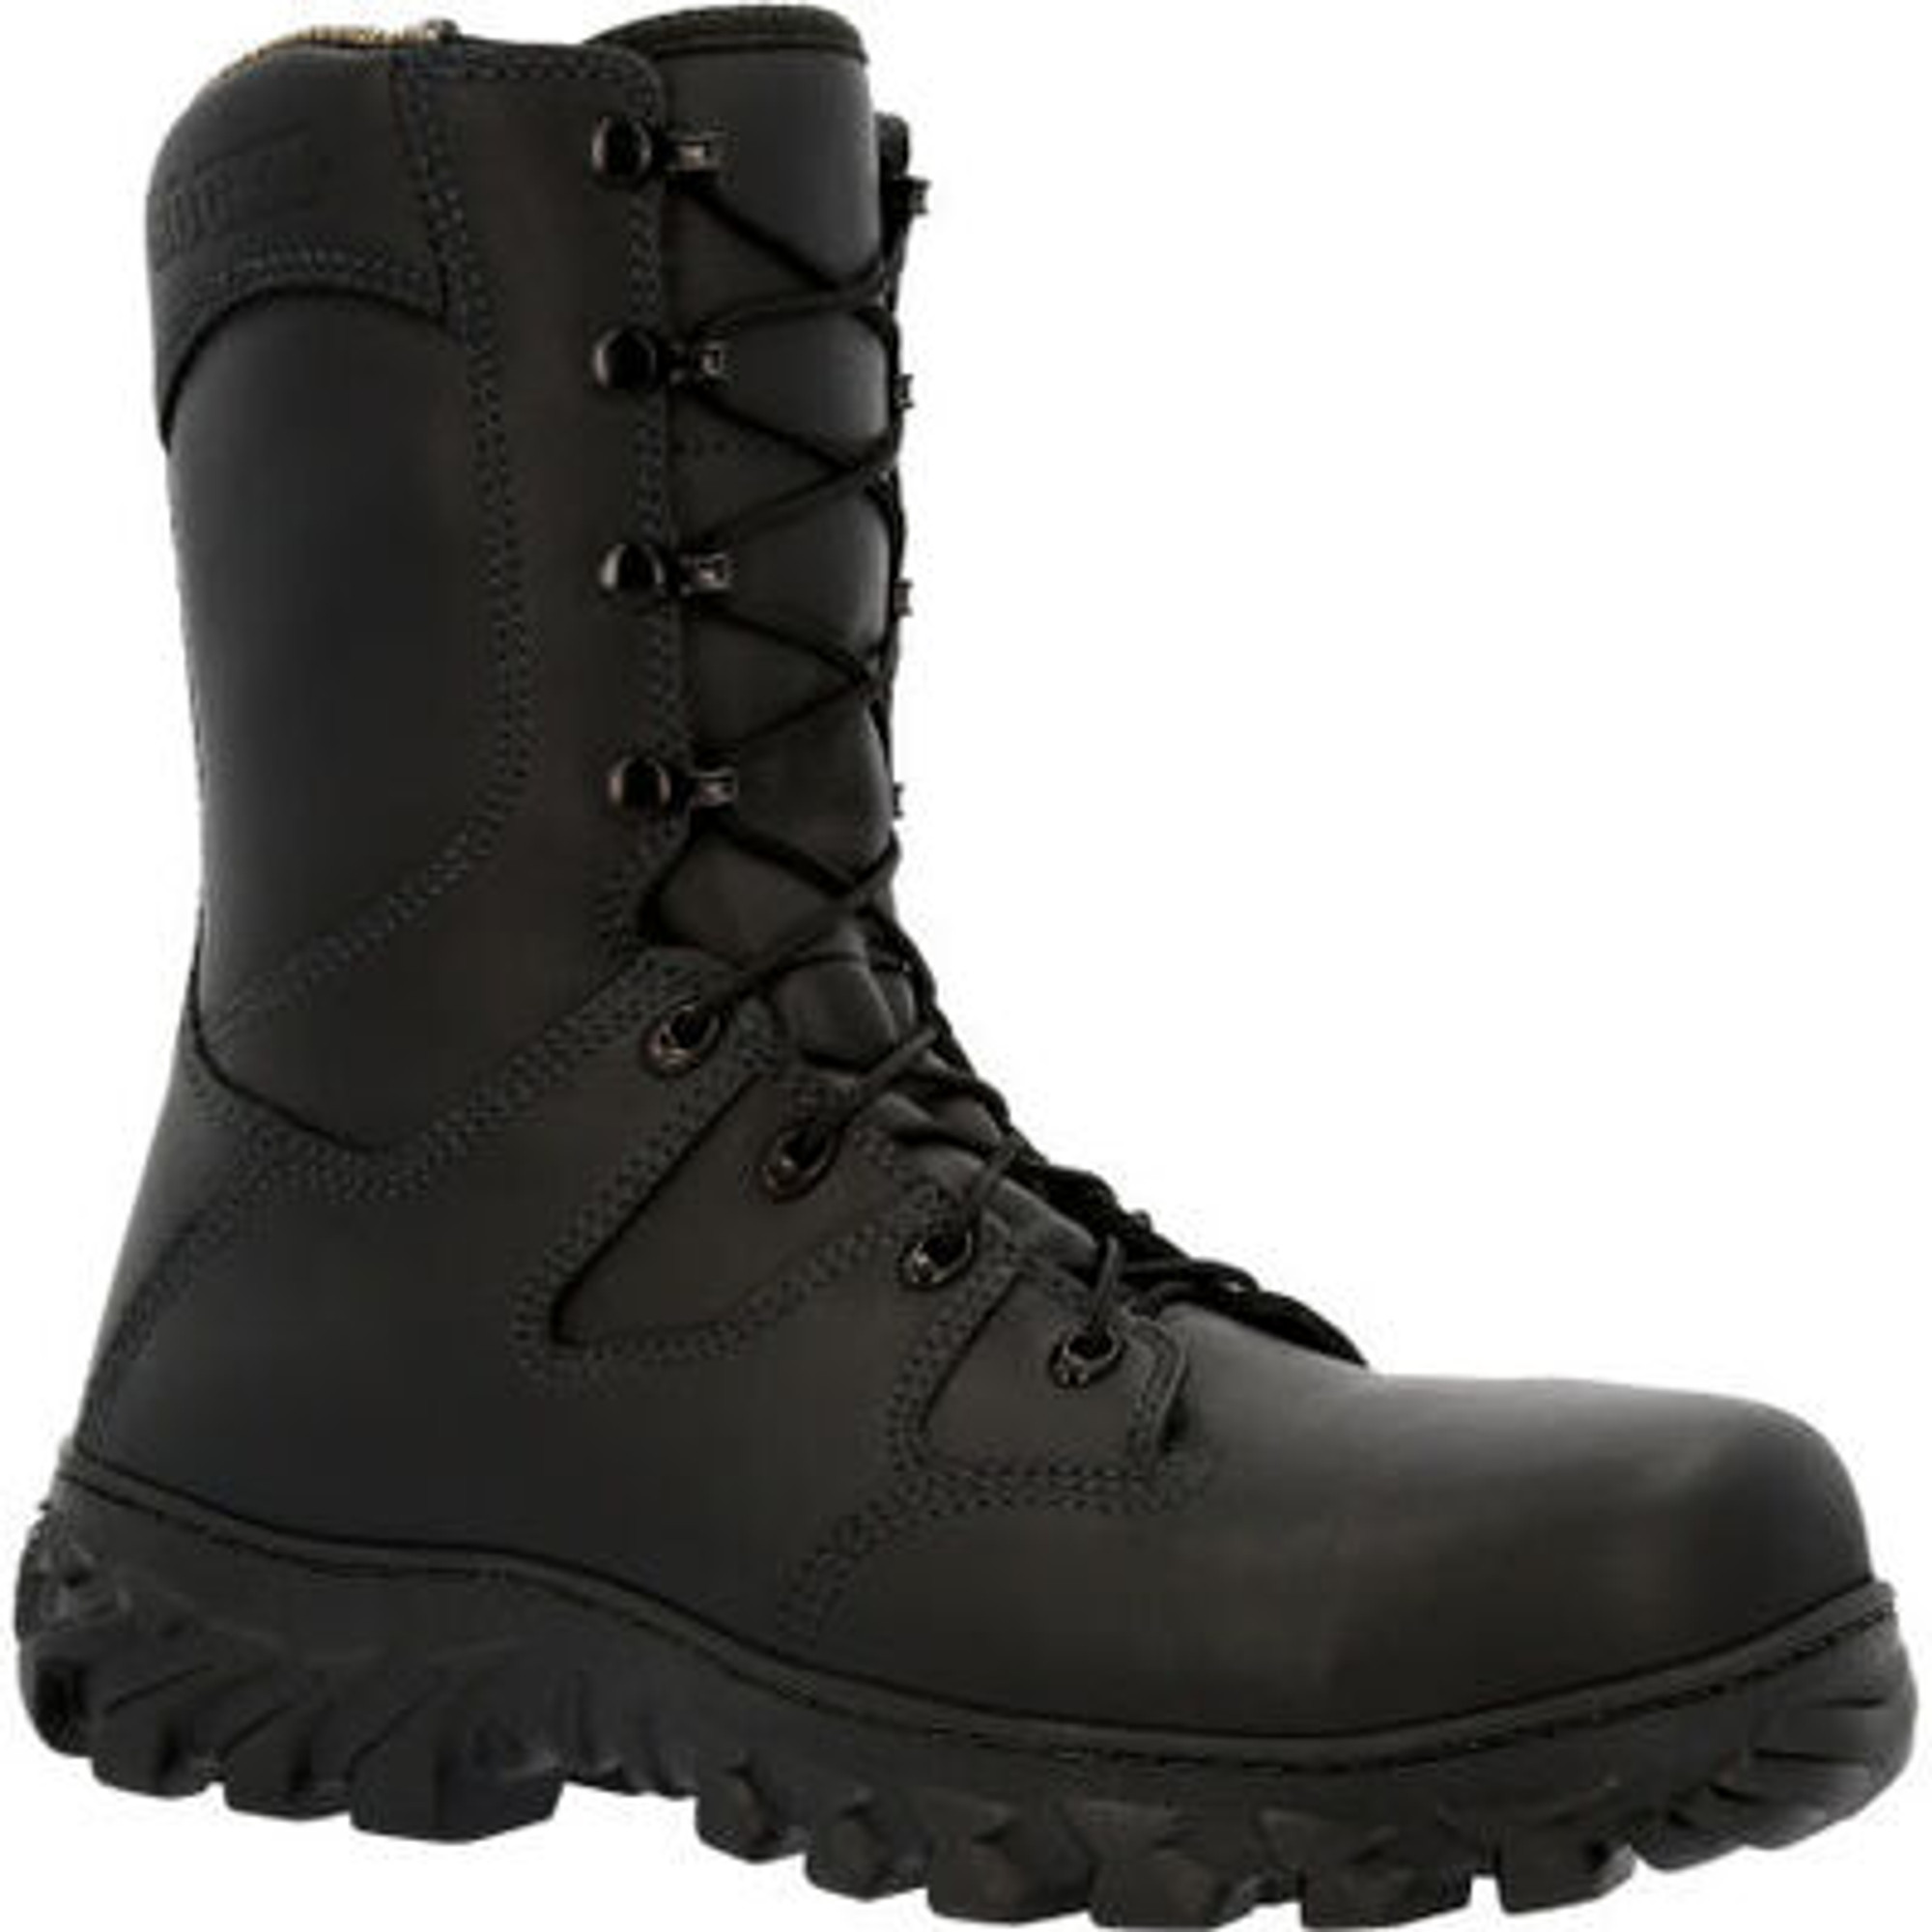 Rpcky Code Red Rescue Nfpa Rated Composite Toe Fire Boot - Black